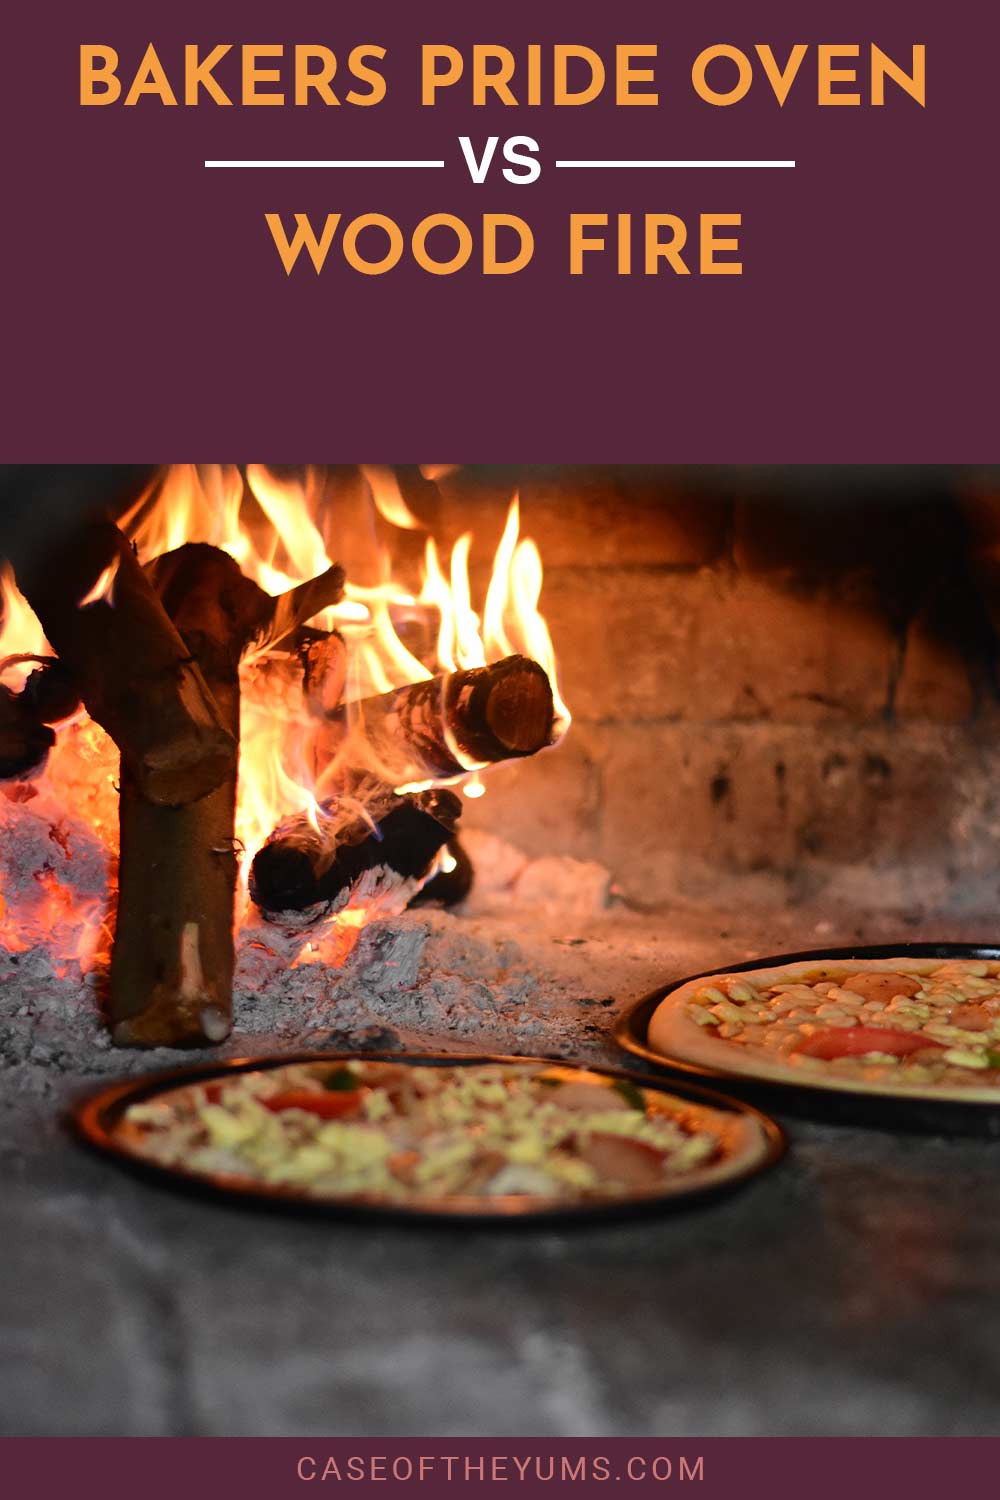 Two pizzas and some flaming wood in an oven - Bakers Pride Oven vs. Wood Fire.